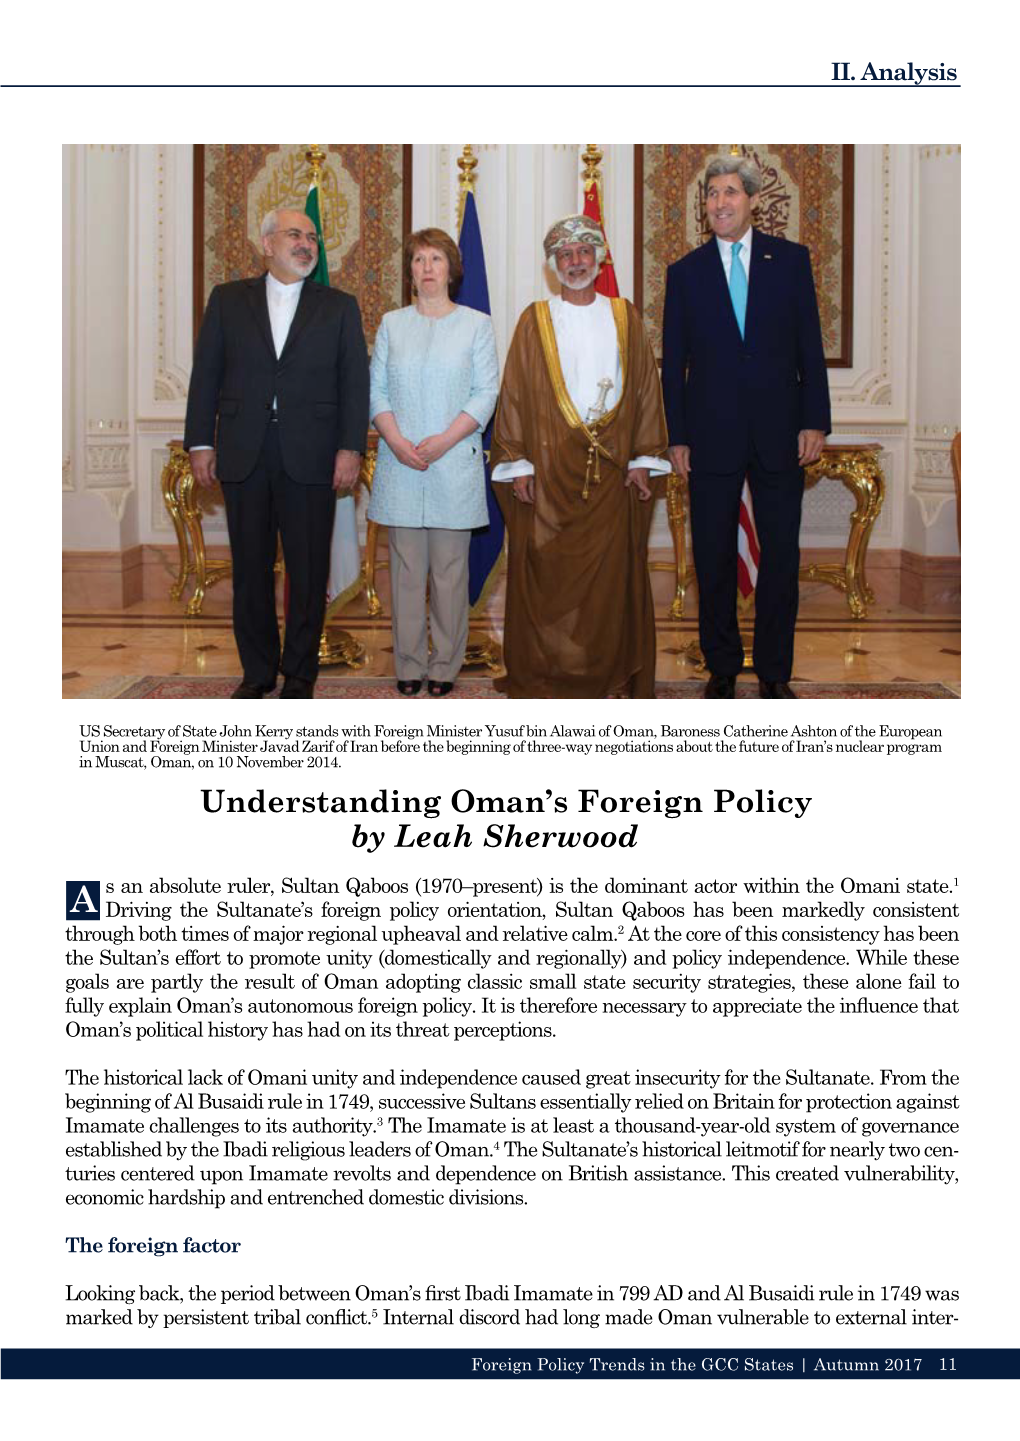 Understanding Oman's Foreign Policy by Leah Sherwood